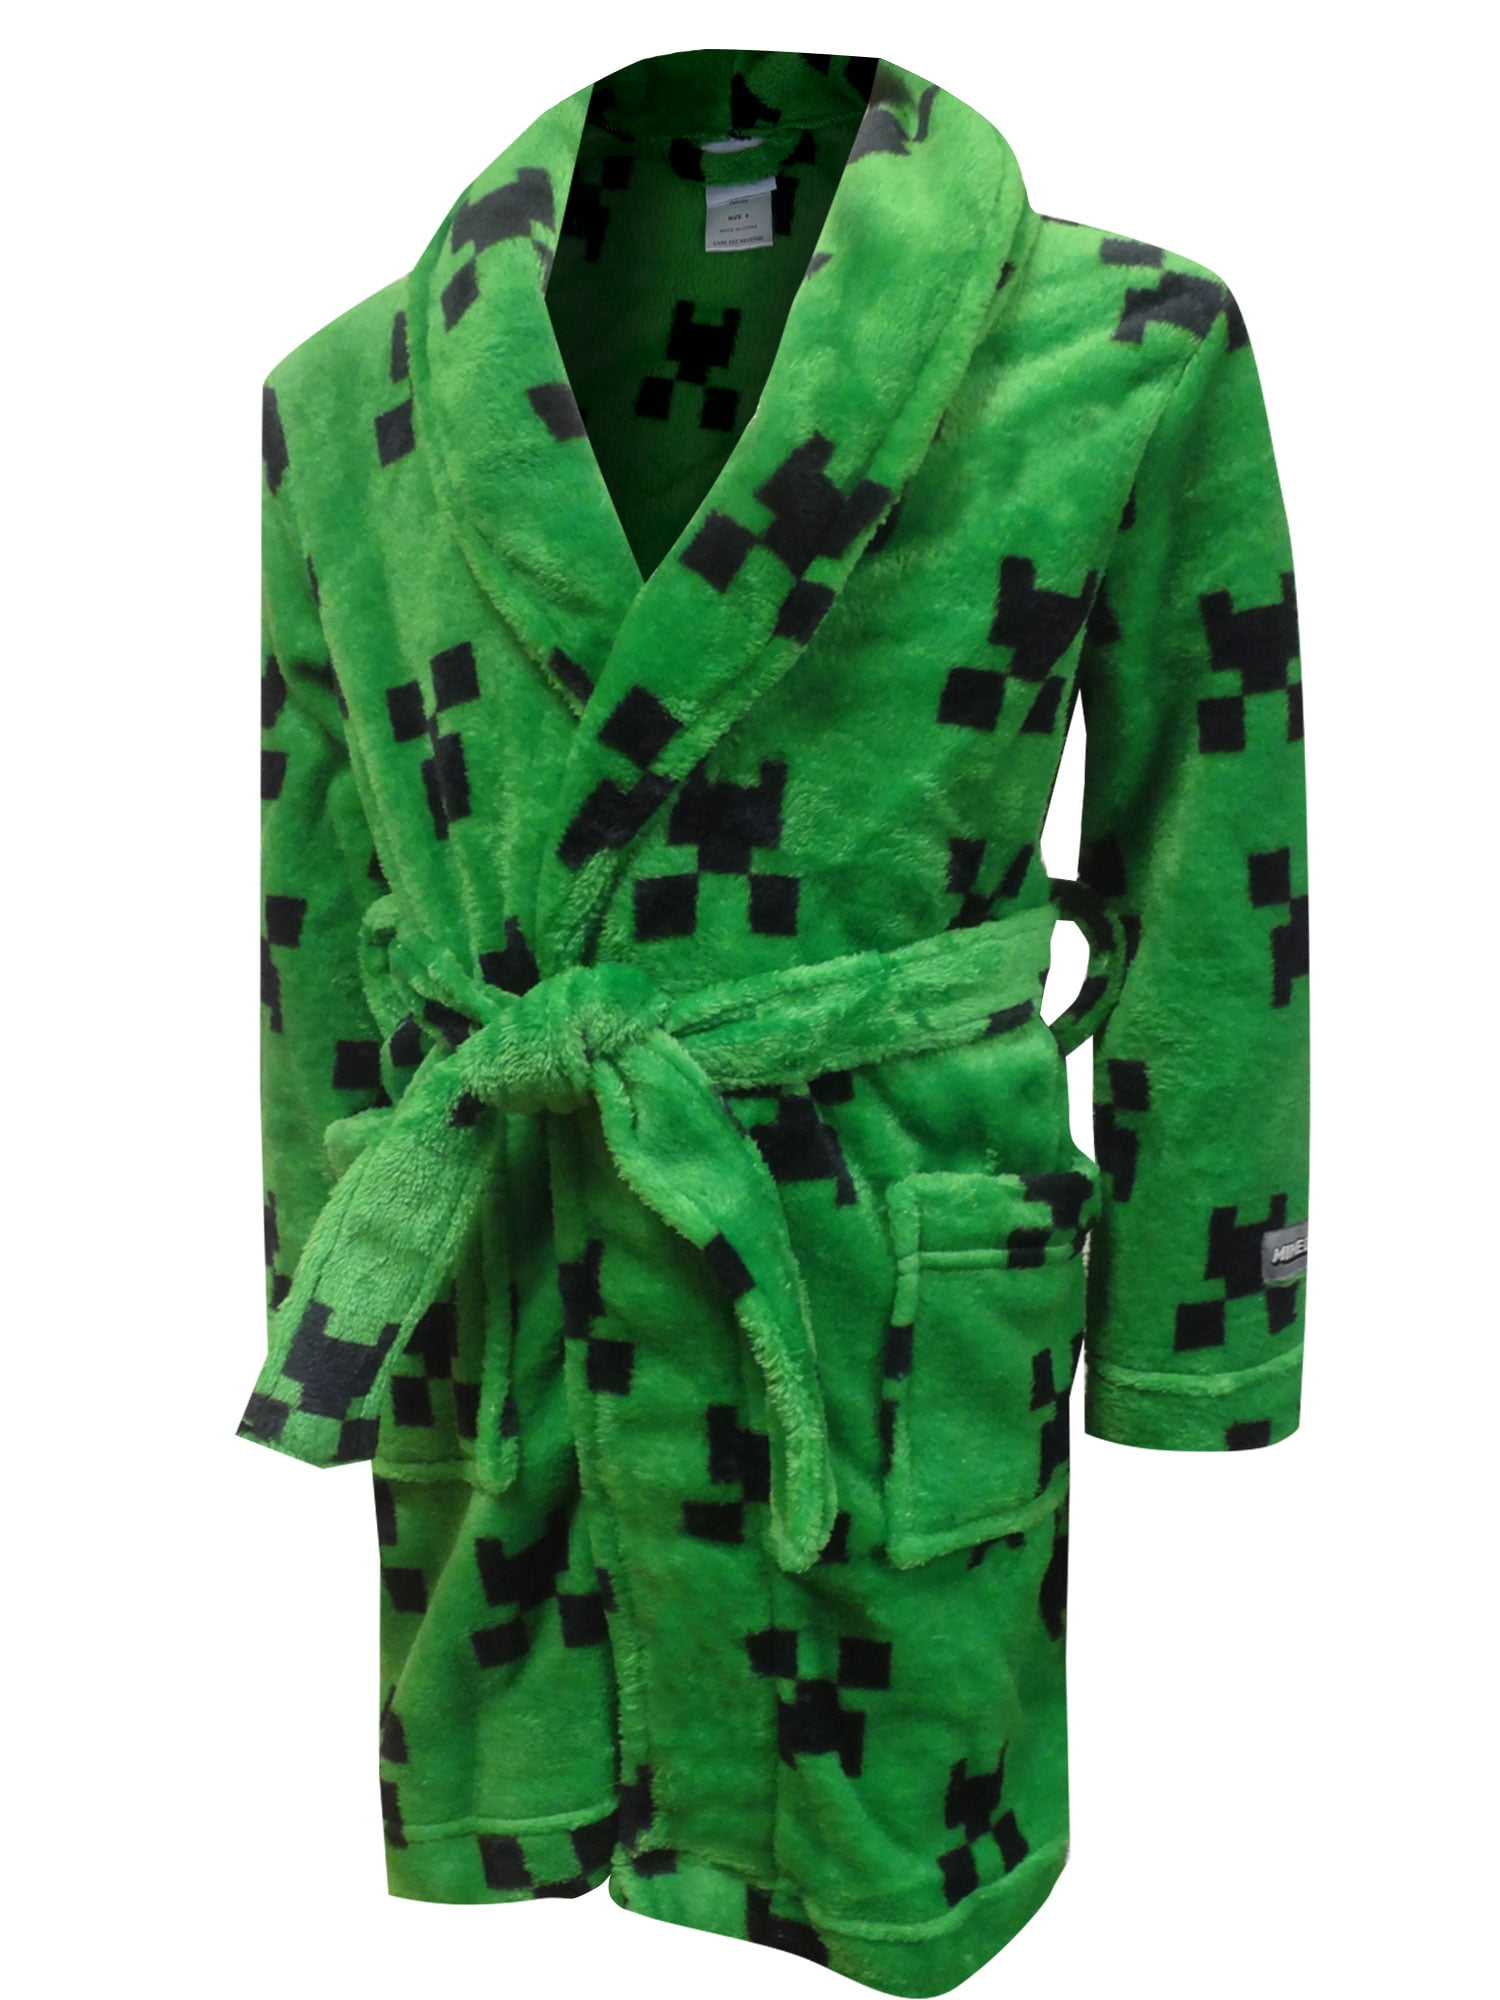 Minecraft Dressing Gown Kids Fleece Hooded Soft Robe with Creeper Design 